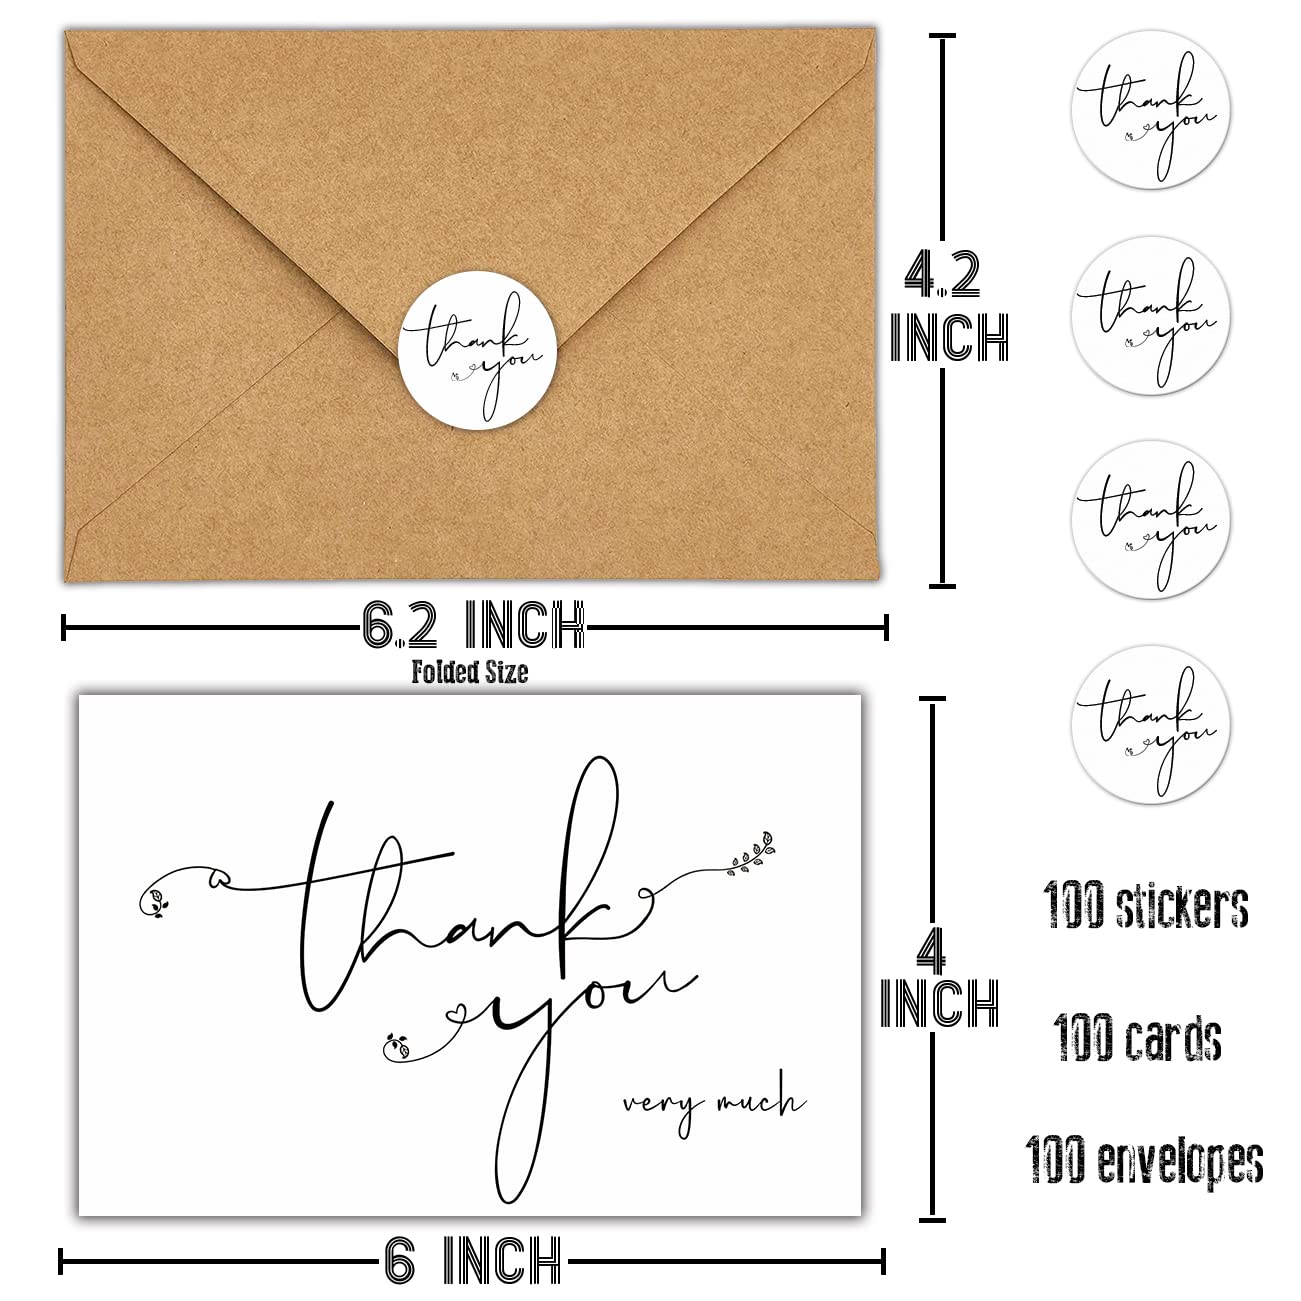 Thank You Cards with Kraft Envelopes and Stickers- Bulk Pack of 100 Classy Thank You Greeting Notes,4x6 Inch Minimalistic Design Perfect for Business, Wedding,Graduation,Baby Shower